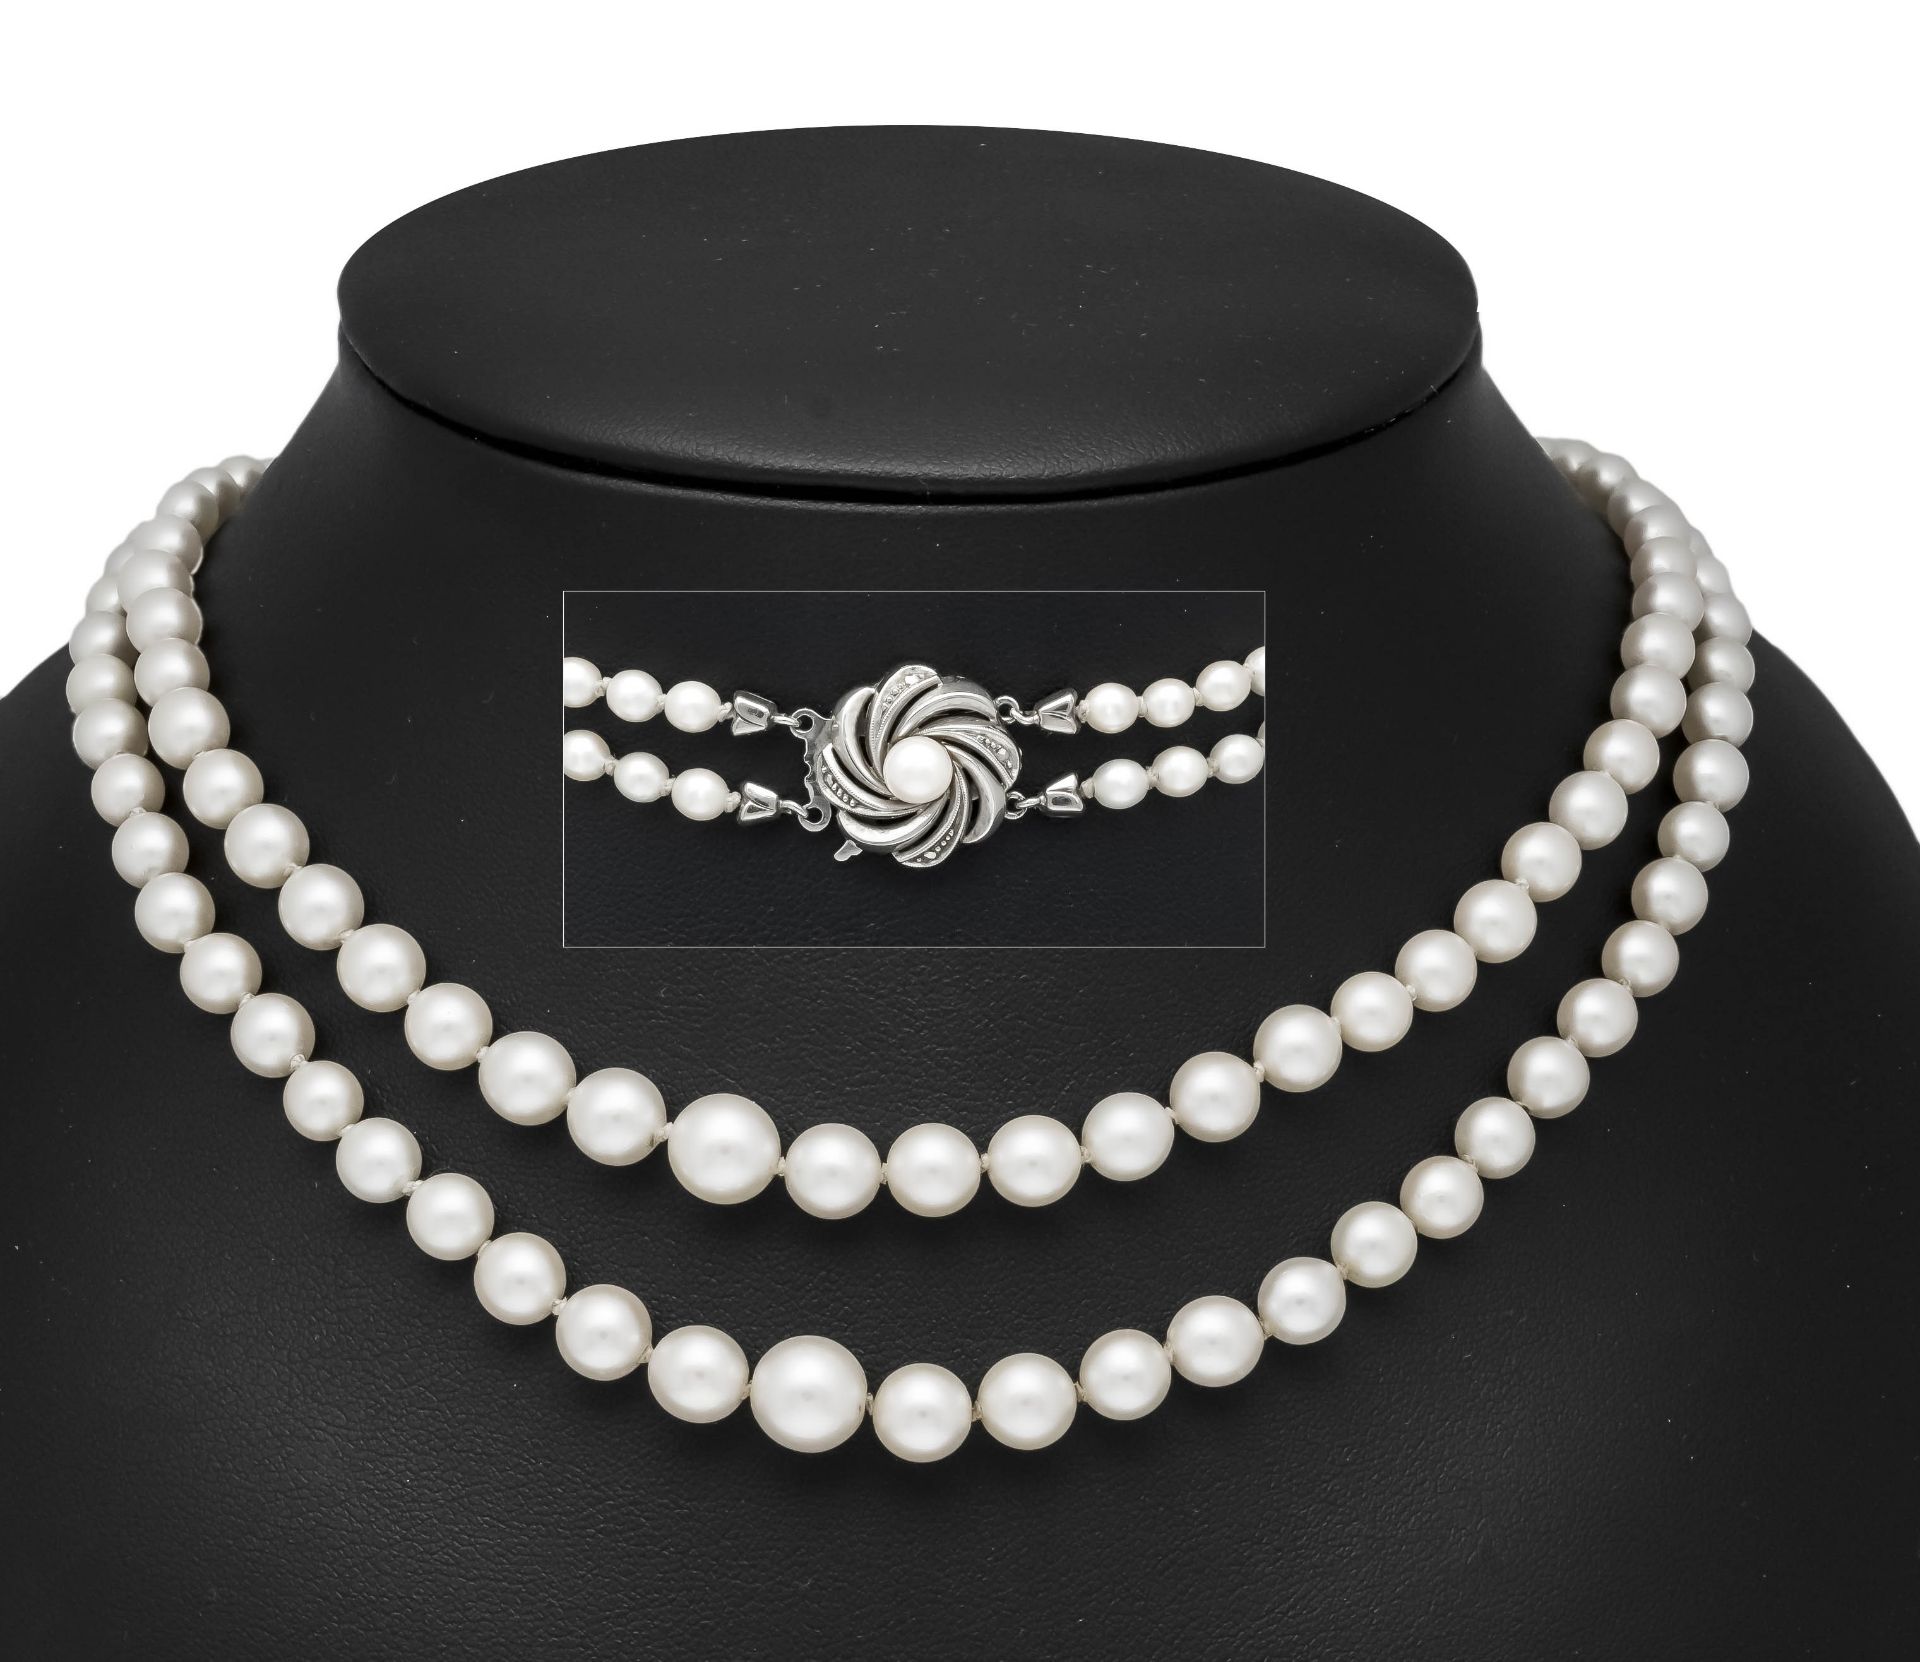 2-row Akoya pearl necklace with clasp WG/GG 585/000 set with a creamy white Akoya pearl 5 mm and